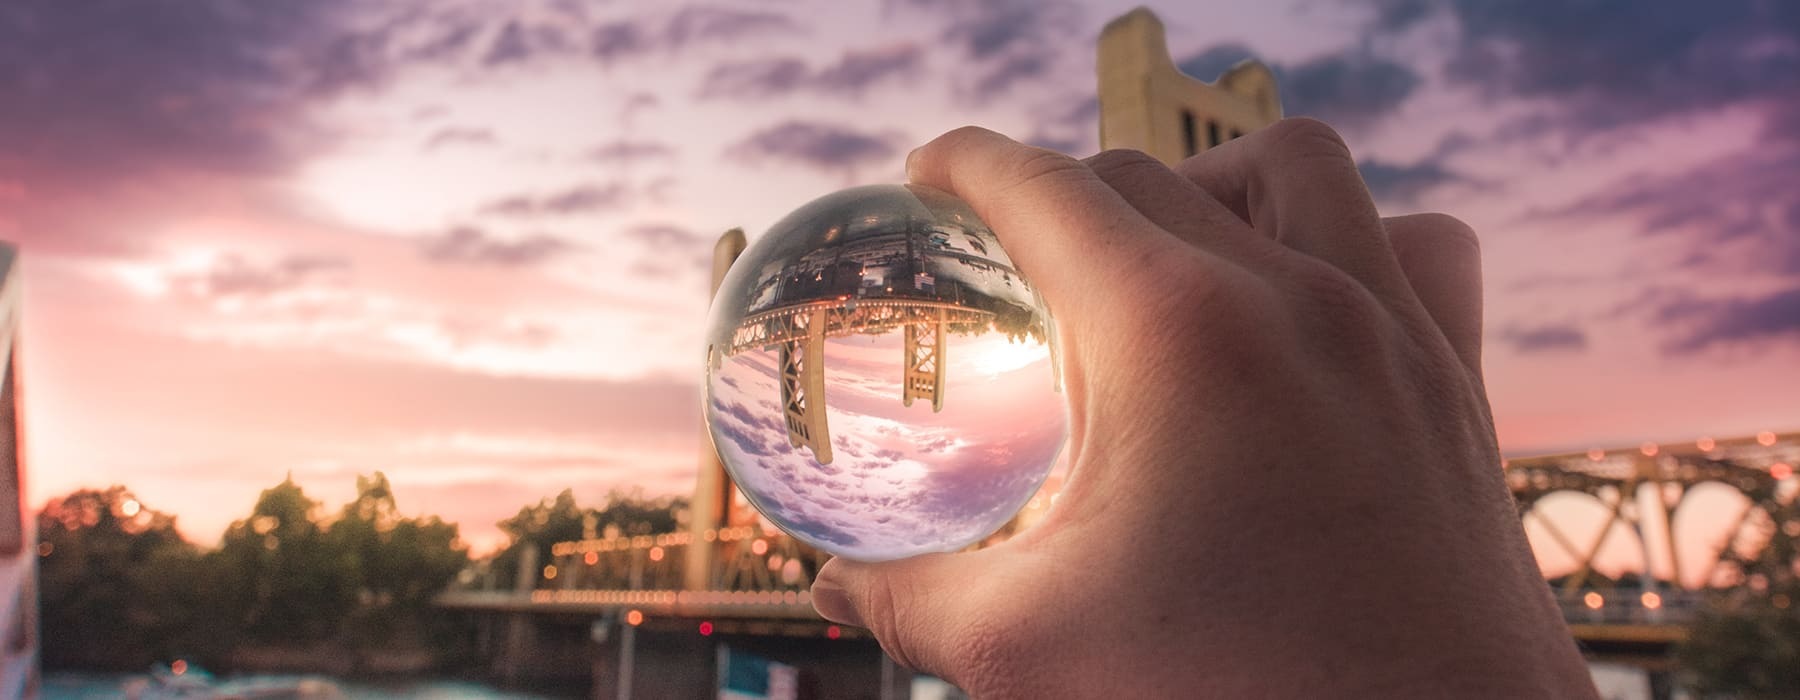 lifestyle image of a hand holding a reflective crystal ball in front of a large river and bridge